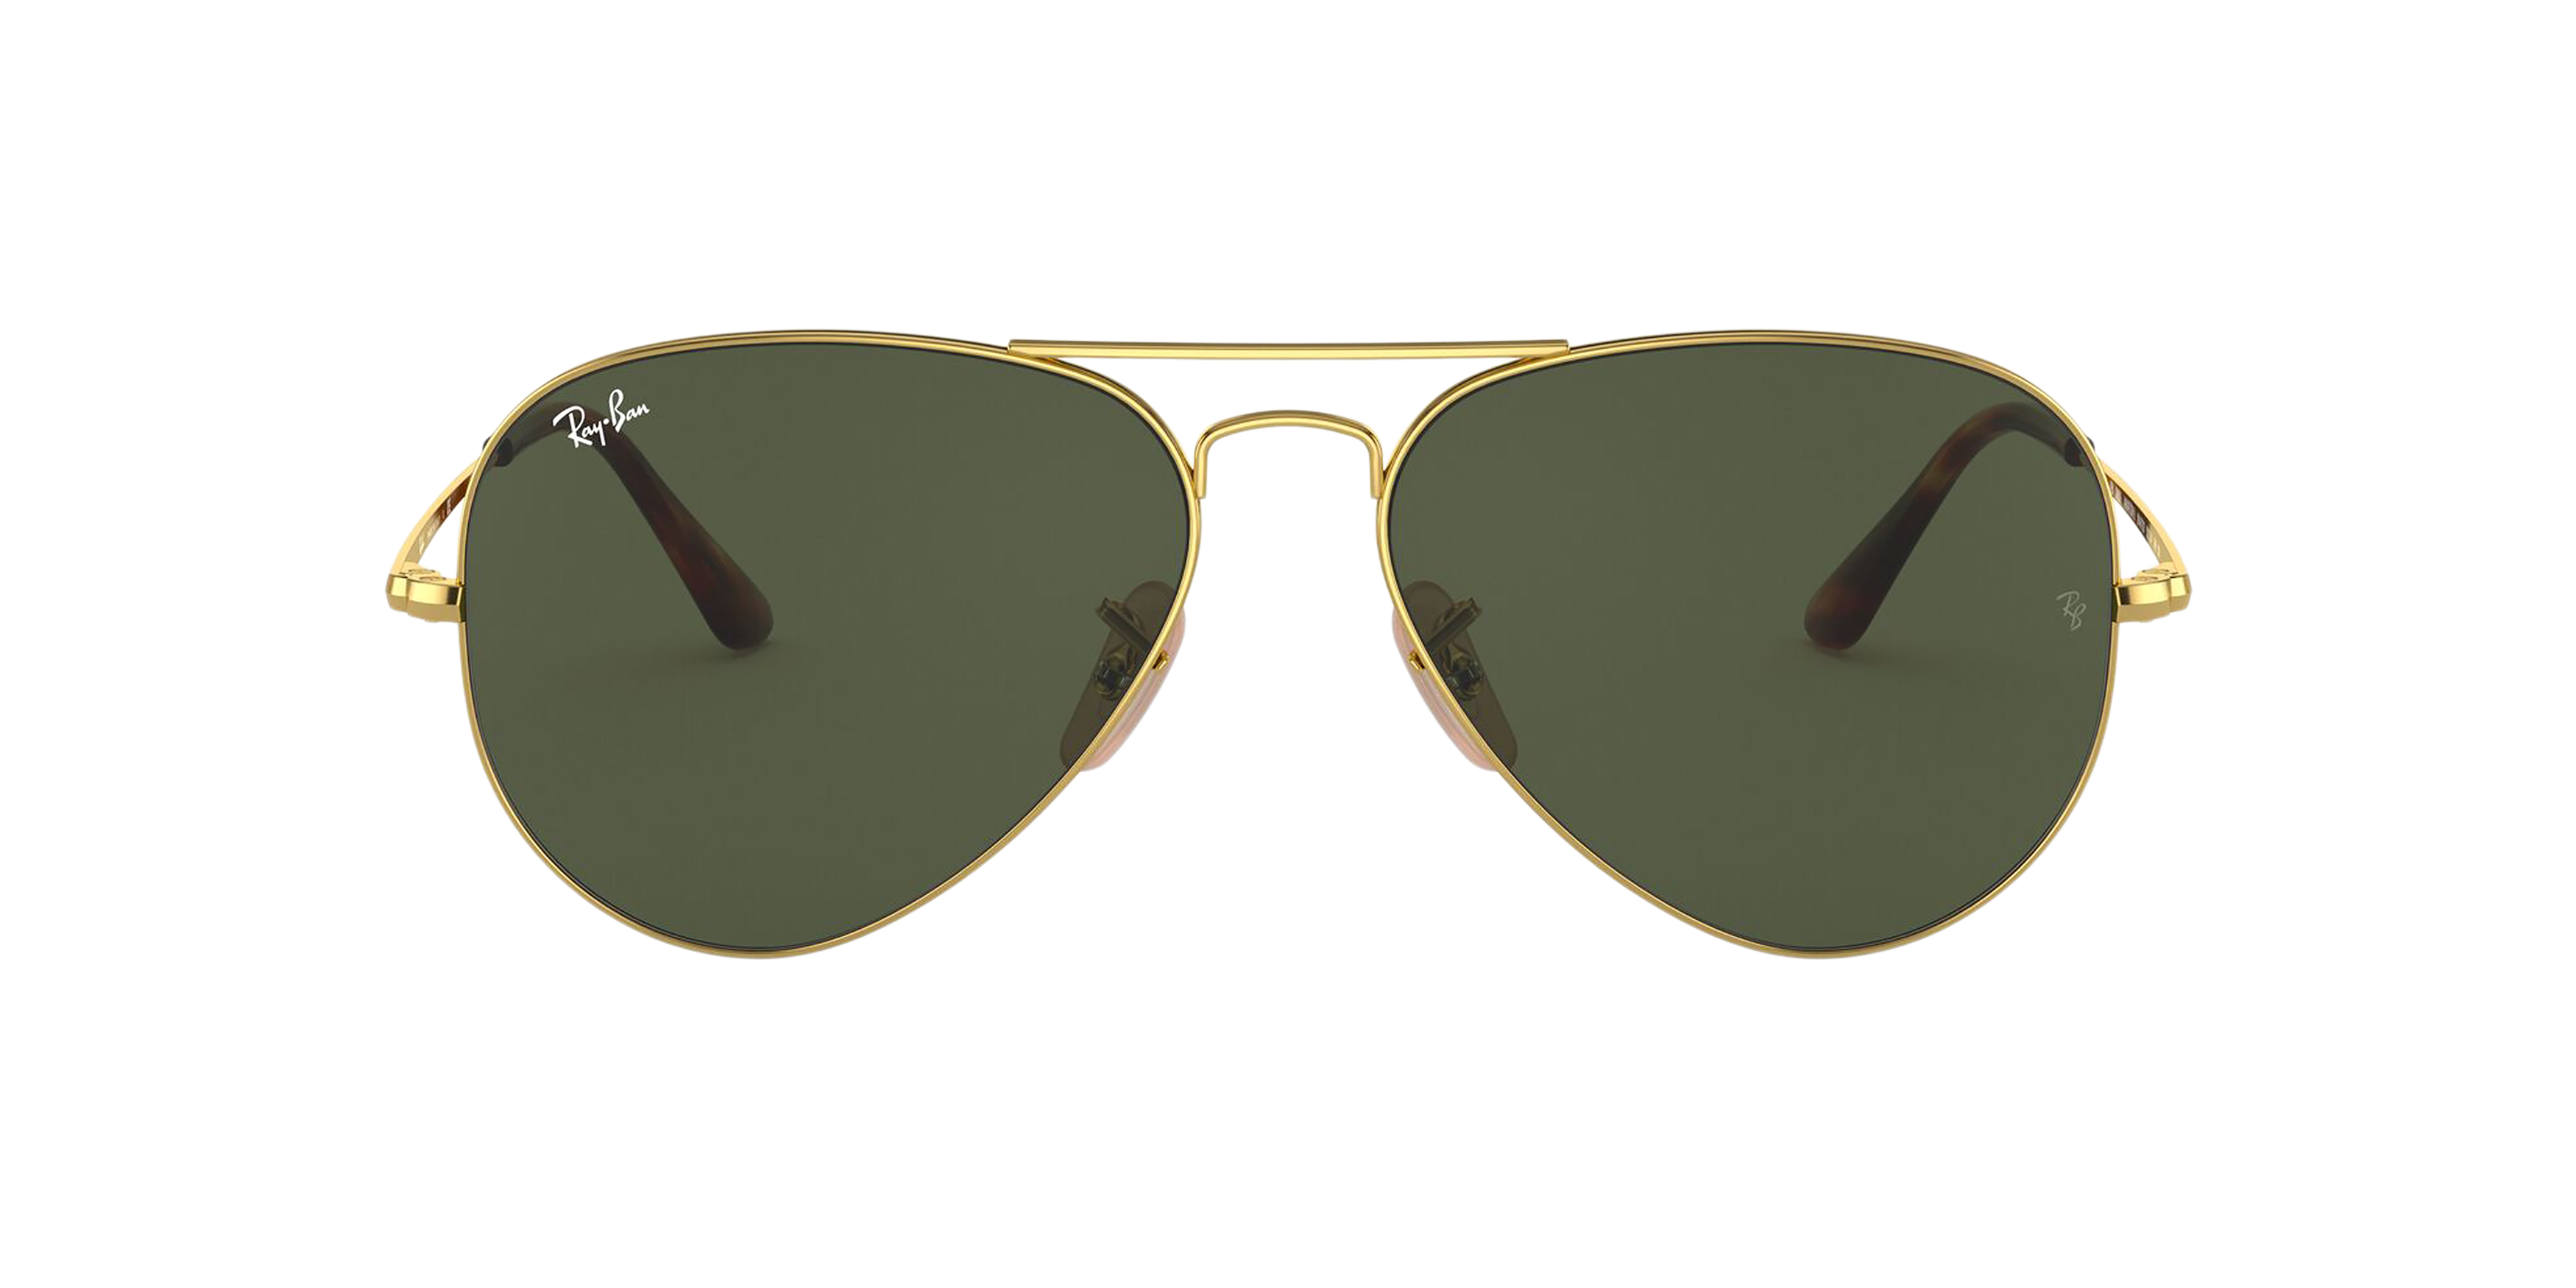 [products.image.front] Ray-Ban Aviator Metal II RB3689 914731